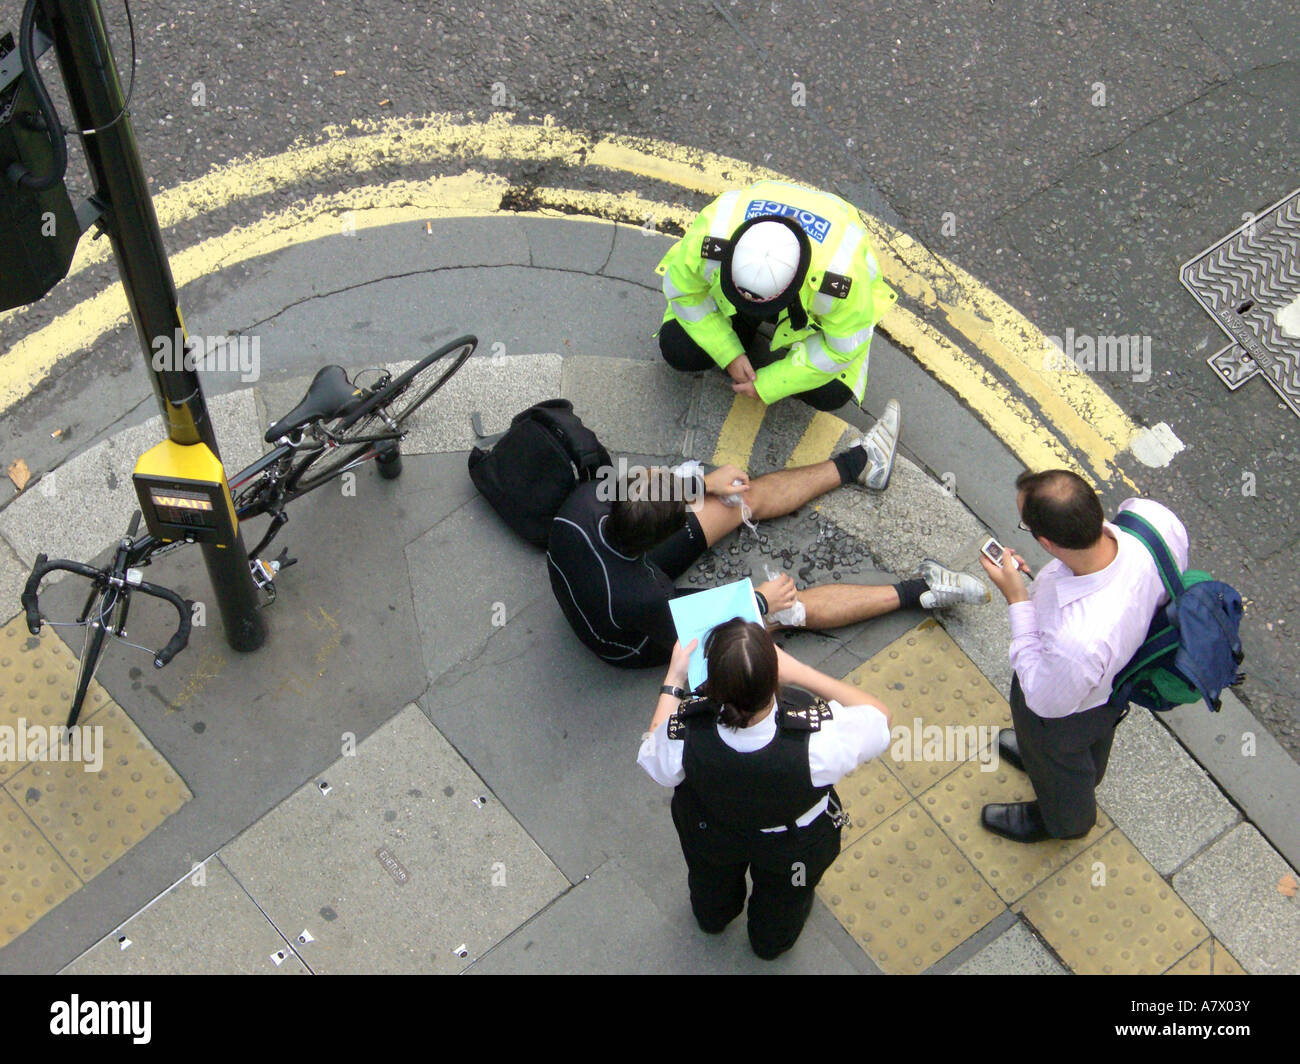 Cyclist lying on pavement with police officer and witness after accident on City of London Street Stock Photo